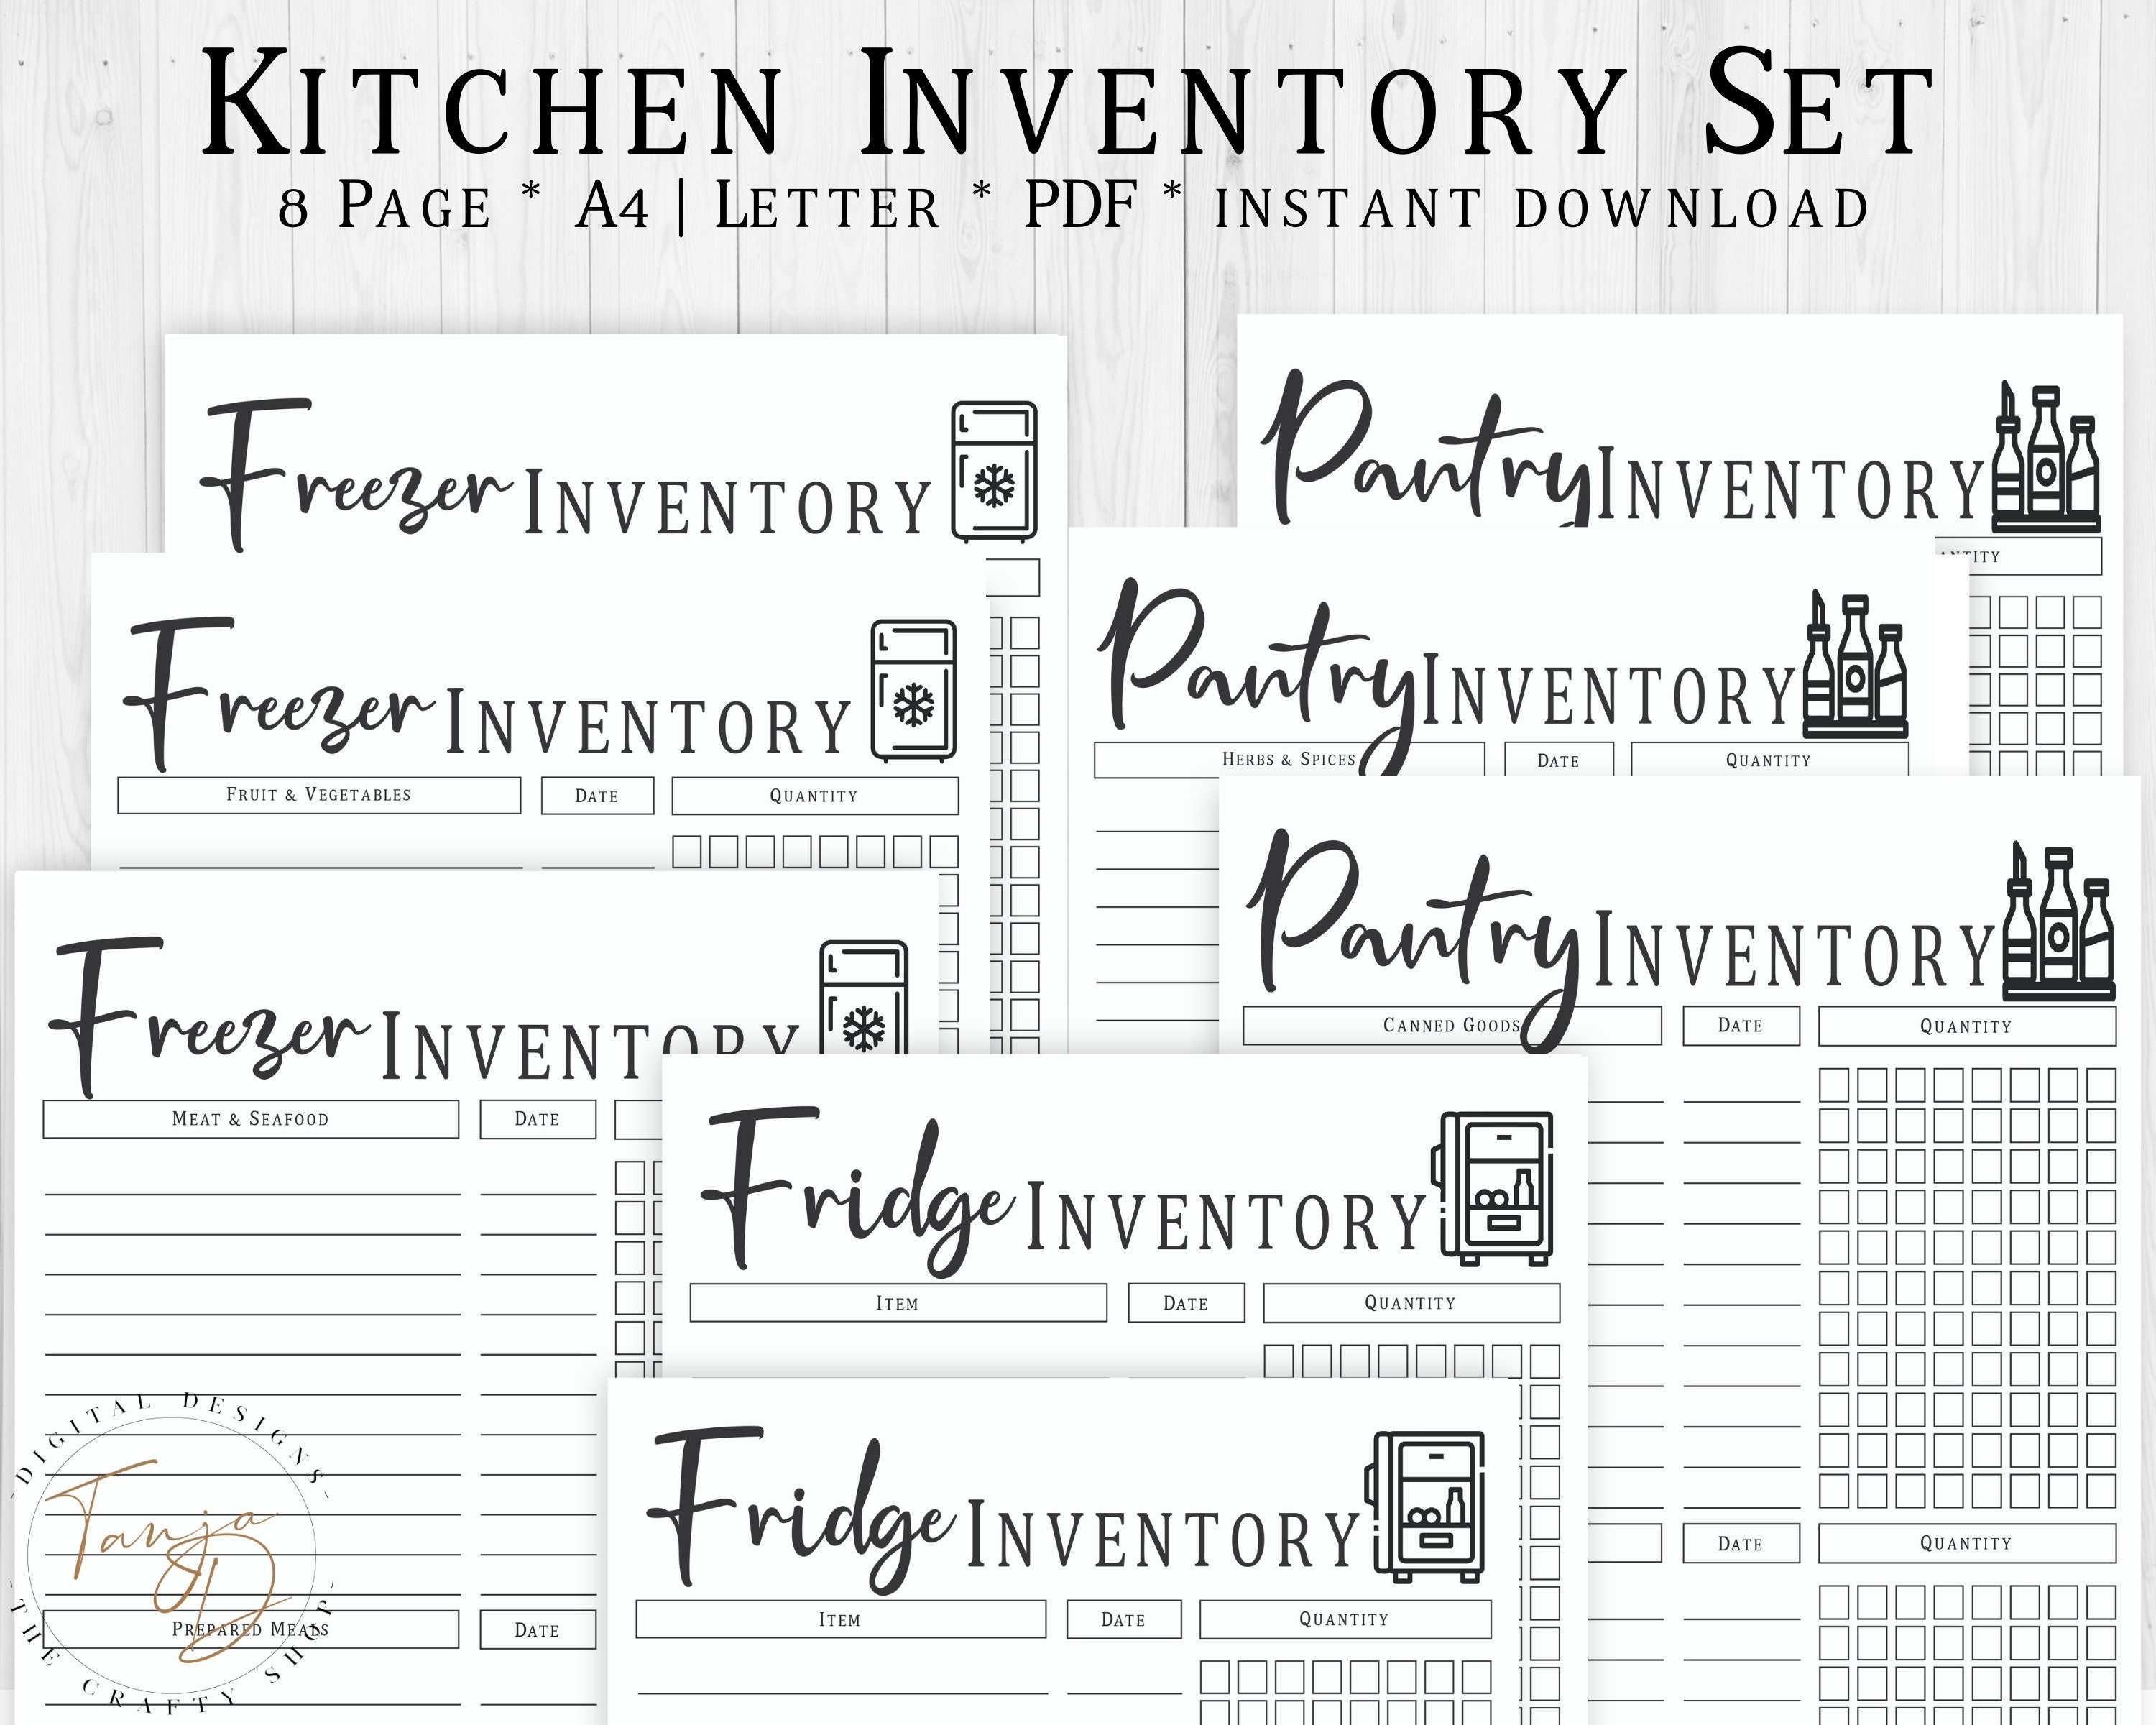 Fridge Inventory and Pantry Inventory Food Tracker Kitchen Inventory Bundle A4 Inventory set with Freezer Inventory Instant Download